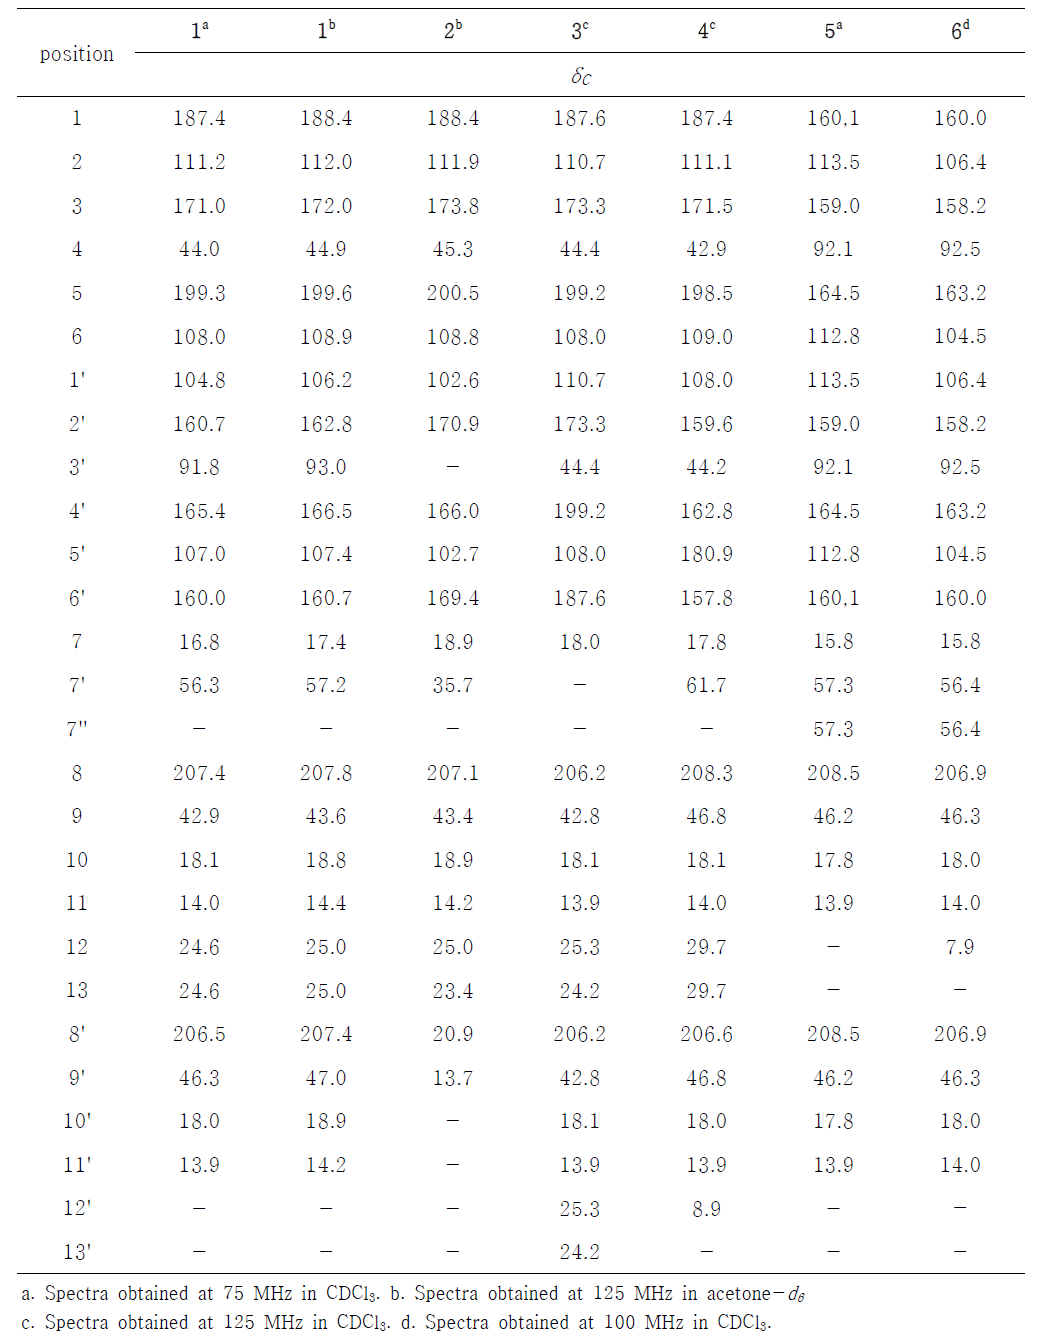 13C-NMR data of compounds 1-6